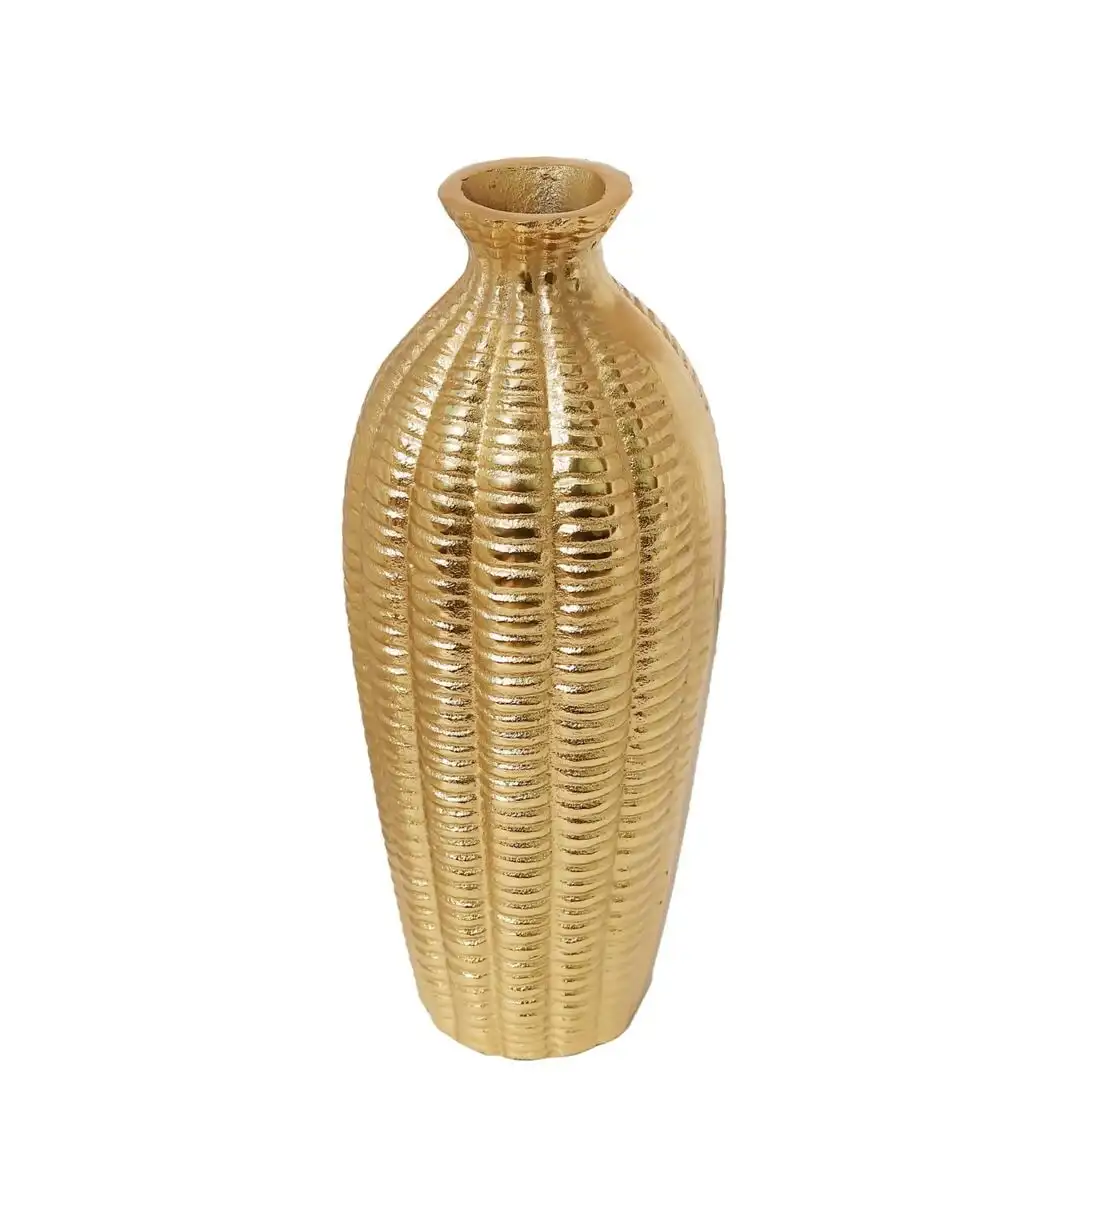 Bottle Shape Table Vase Modern Design Feature With Kernel Texture For Elevating Any Floral Arrangement With Understated Beauty